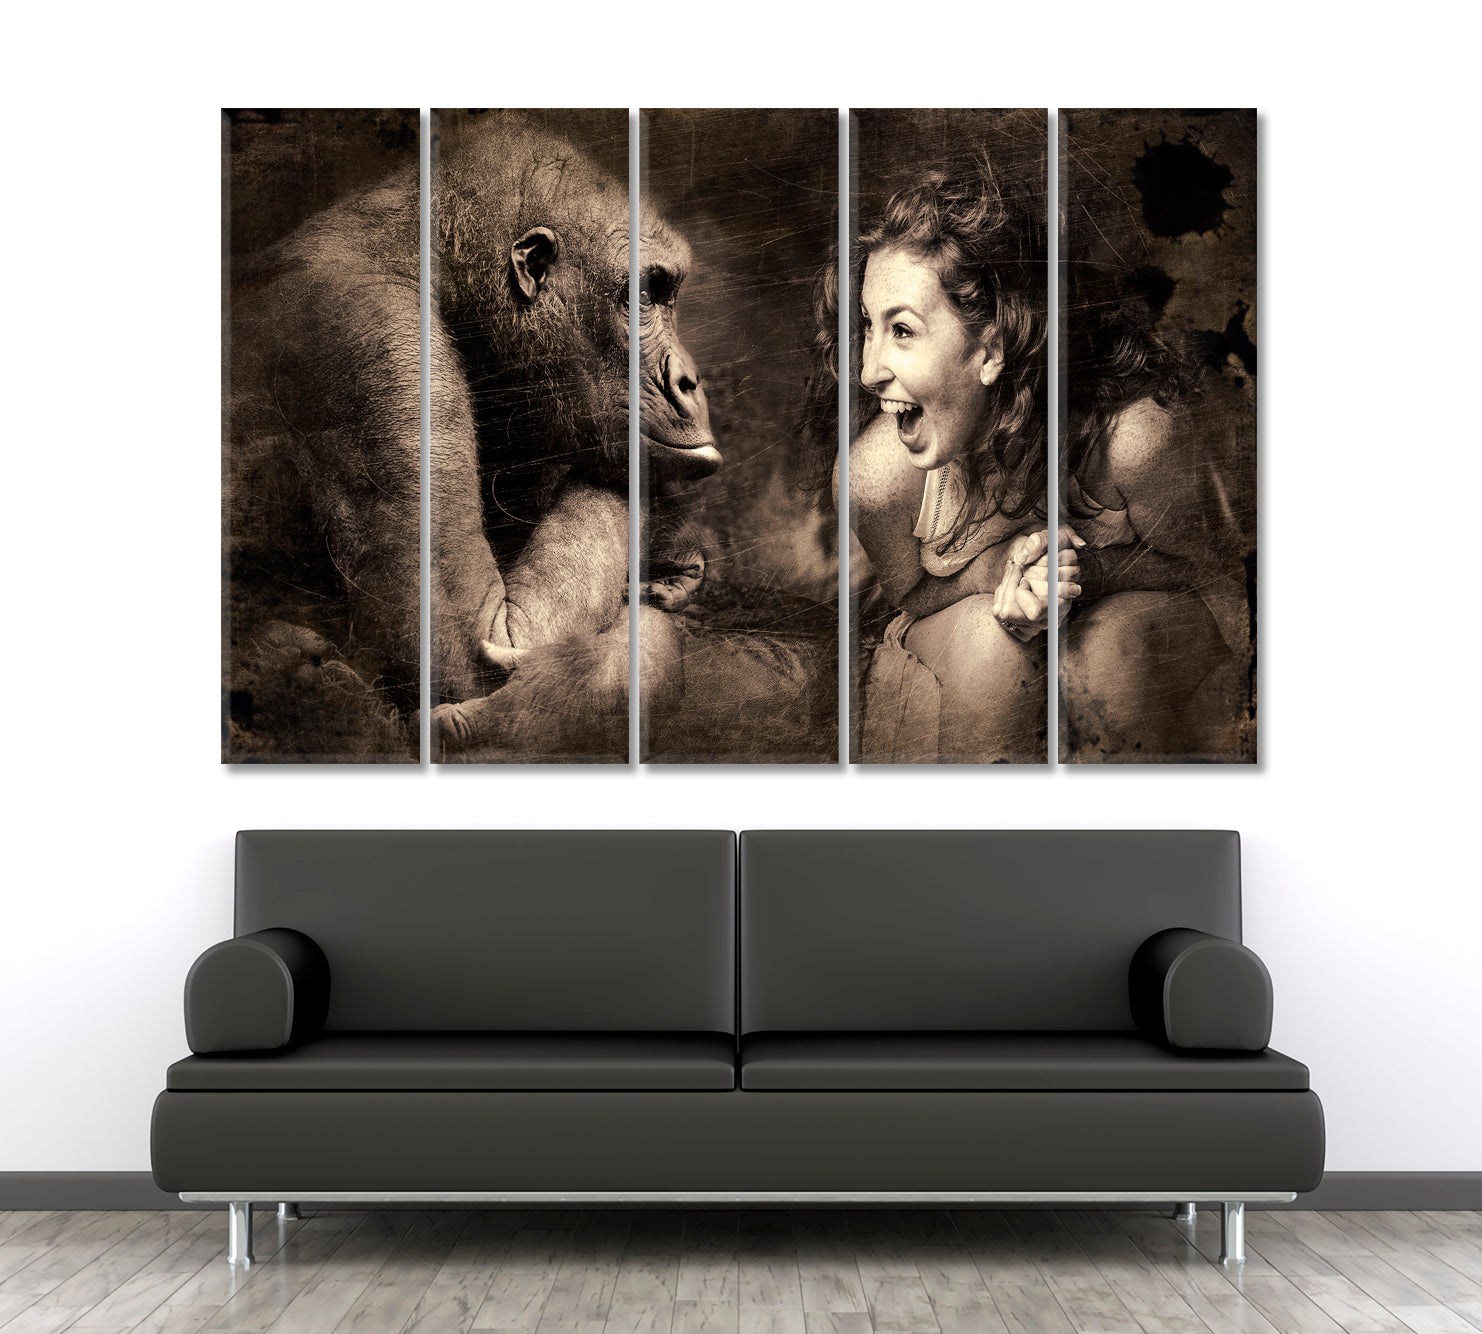 PRETTY WOMAN AND MONKEY Thru Emotions For a Change Vintage Poster Animals Canvas Print Artesty 5 panels 36" x 24" 